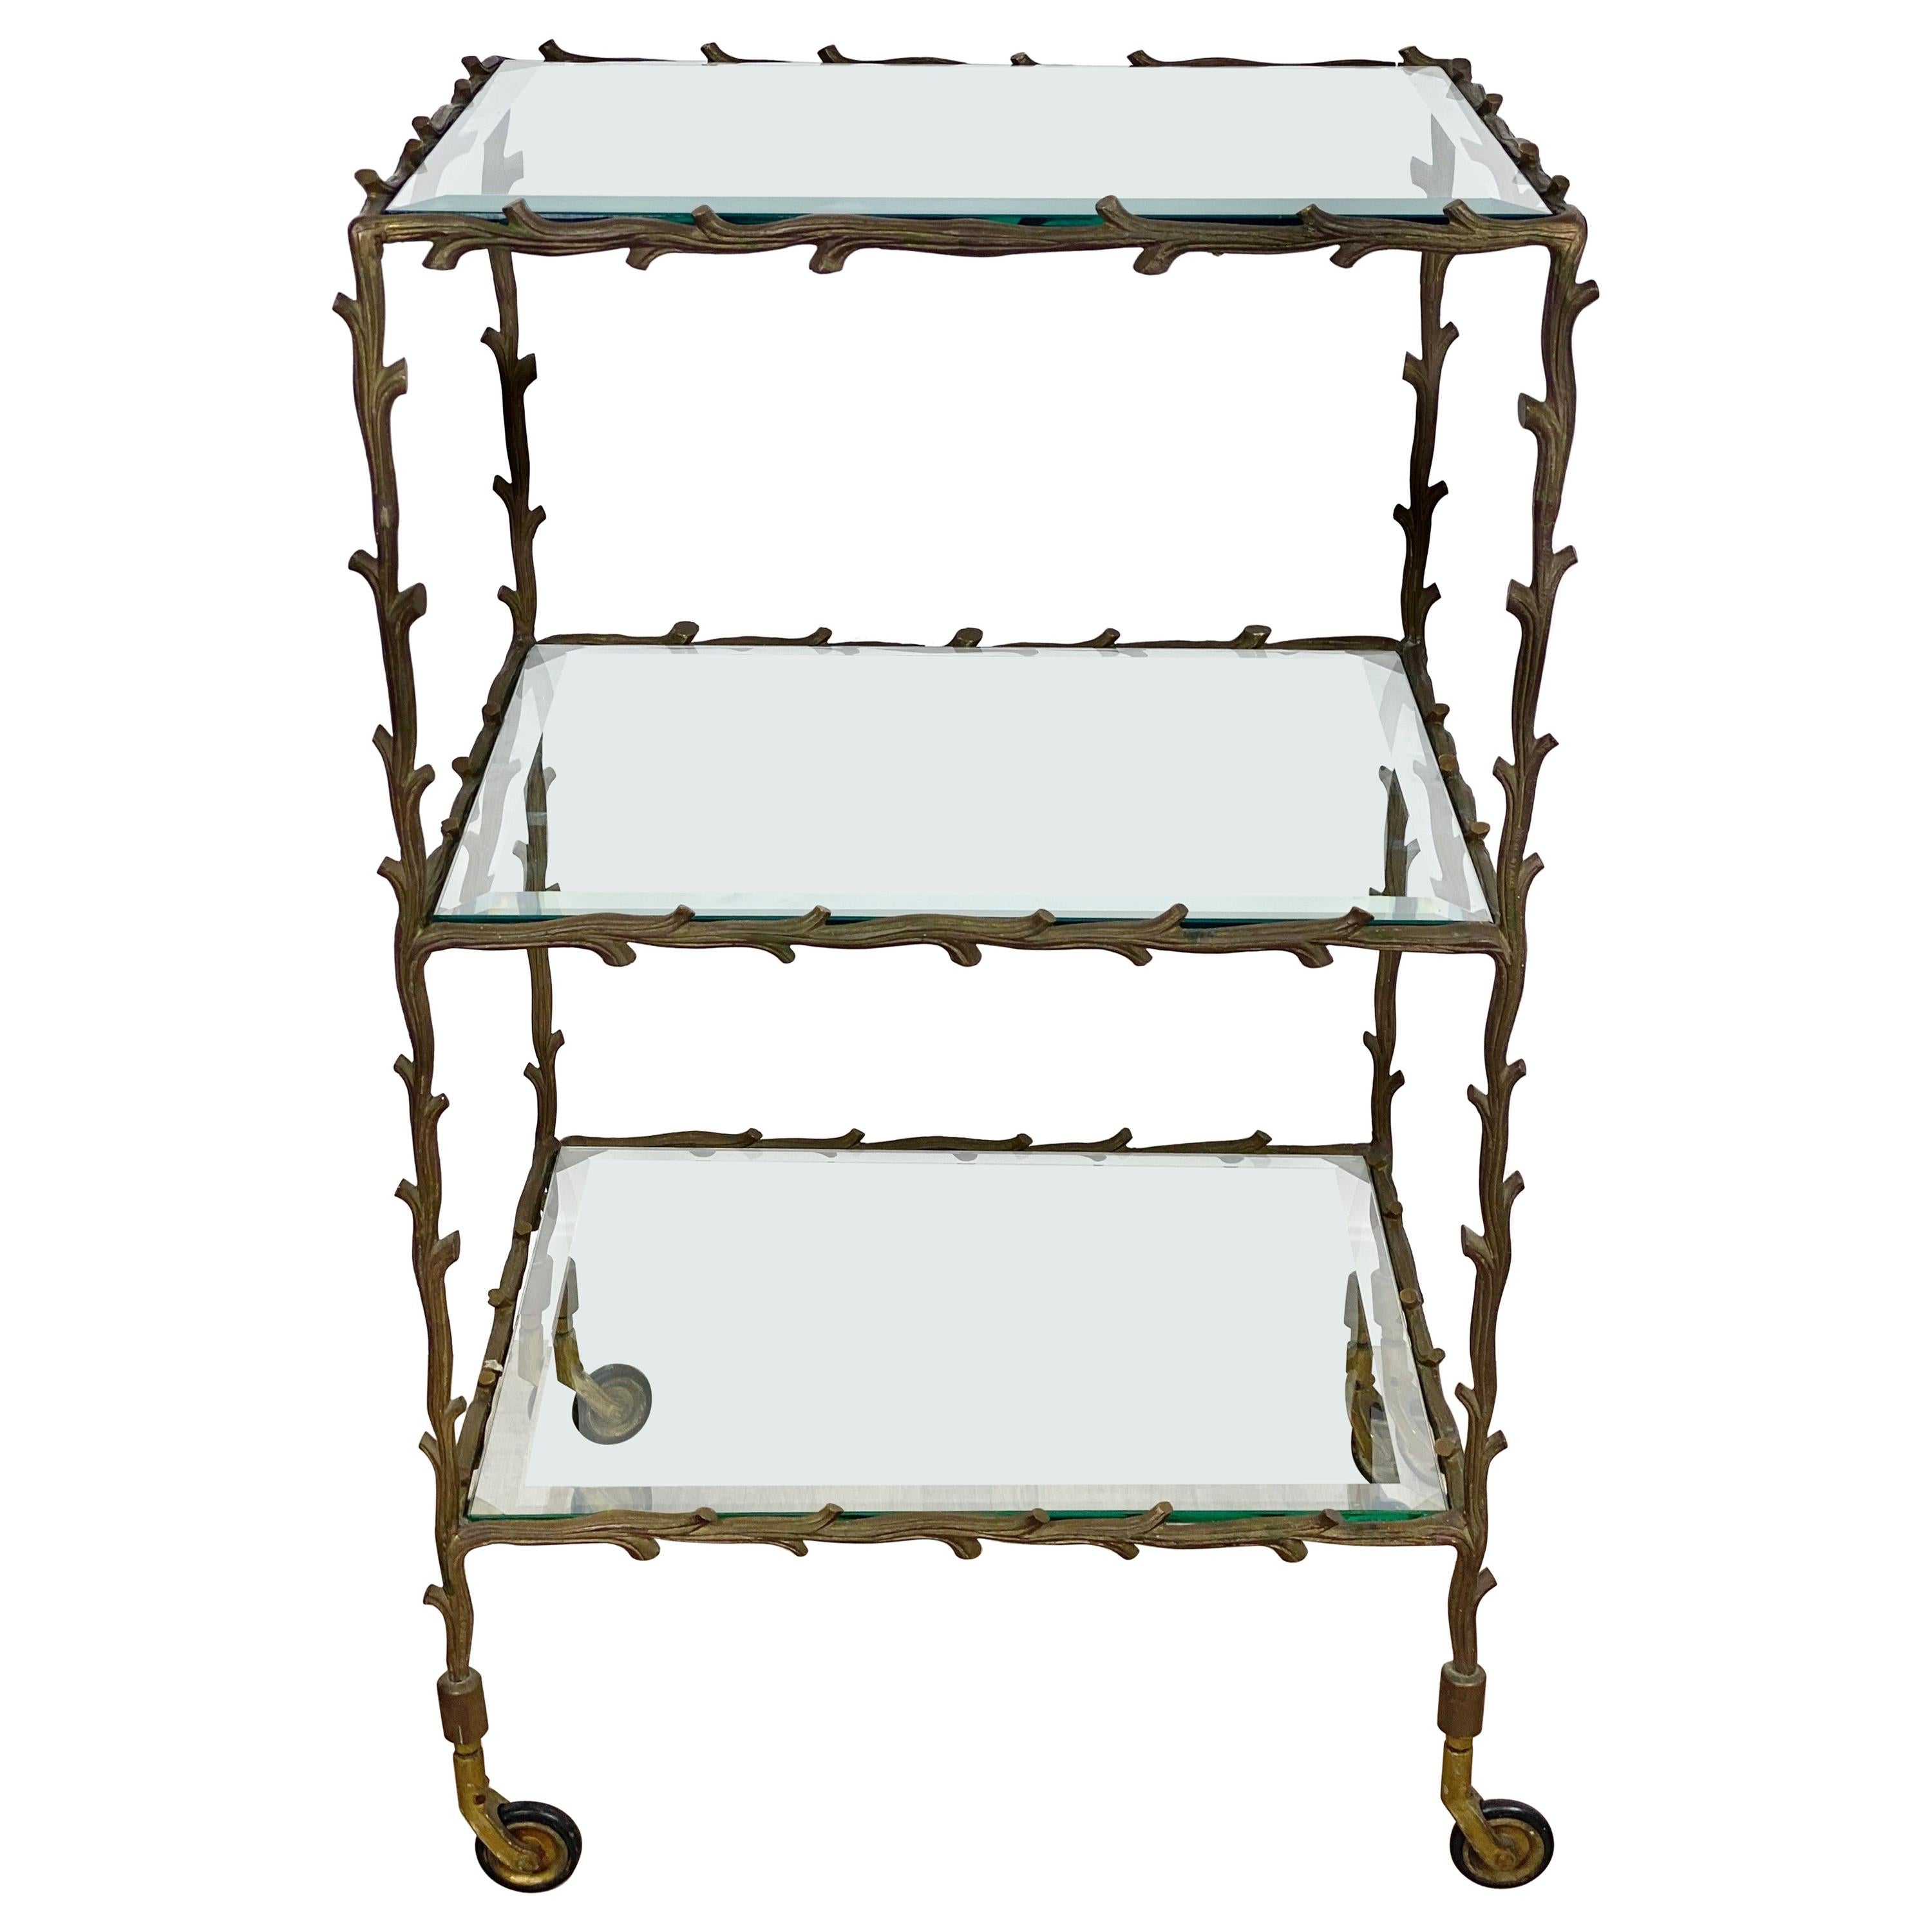 This Maison Baguès serving cart trolley with very animated brass legs of branches (not the typical faux bamboo) which make it more rare. Three glass shelves. Made in France, circa 1950.
The vegetal and wood shaped design ornament is very organic